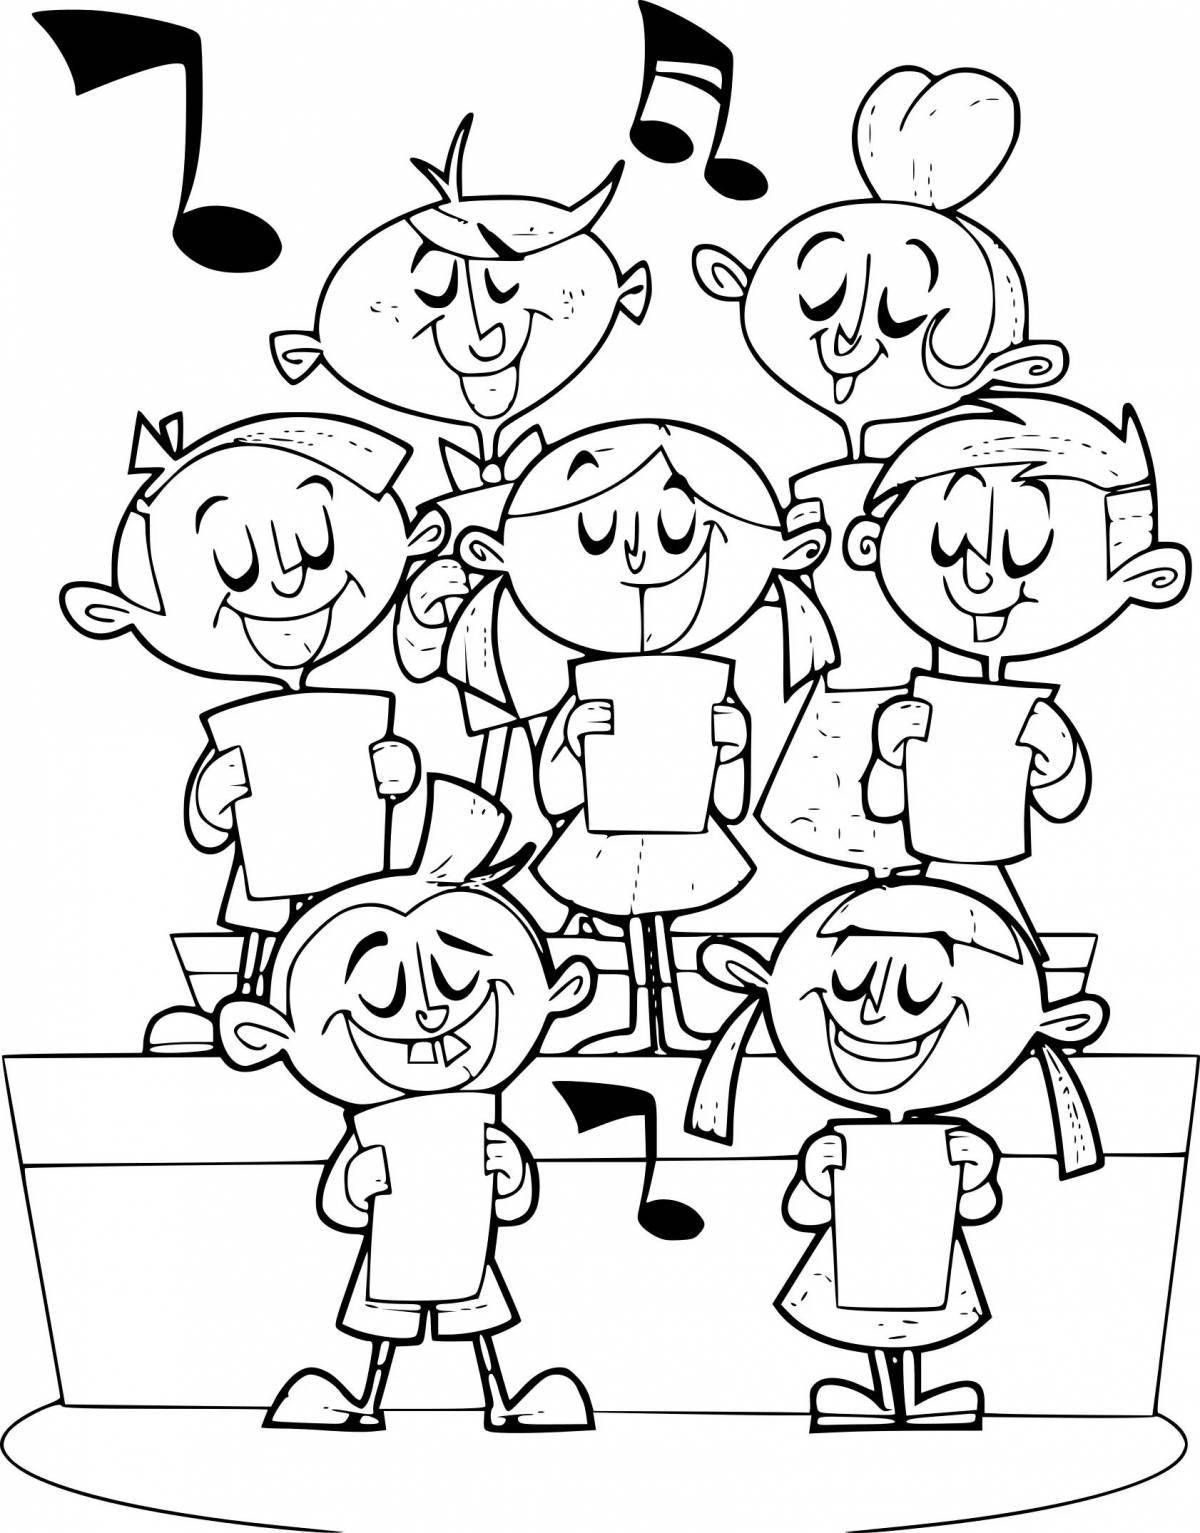 Chorus of nice coloring pages